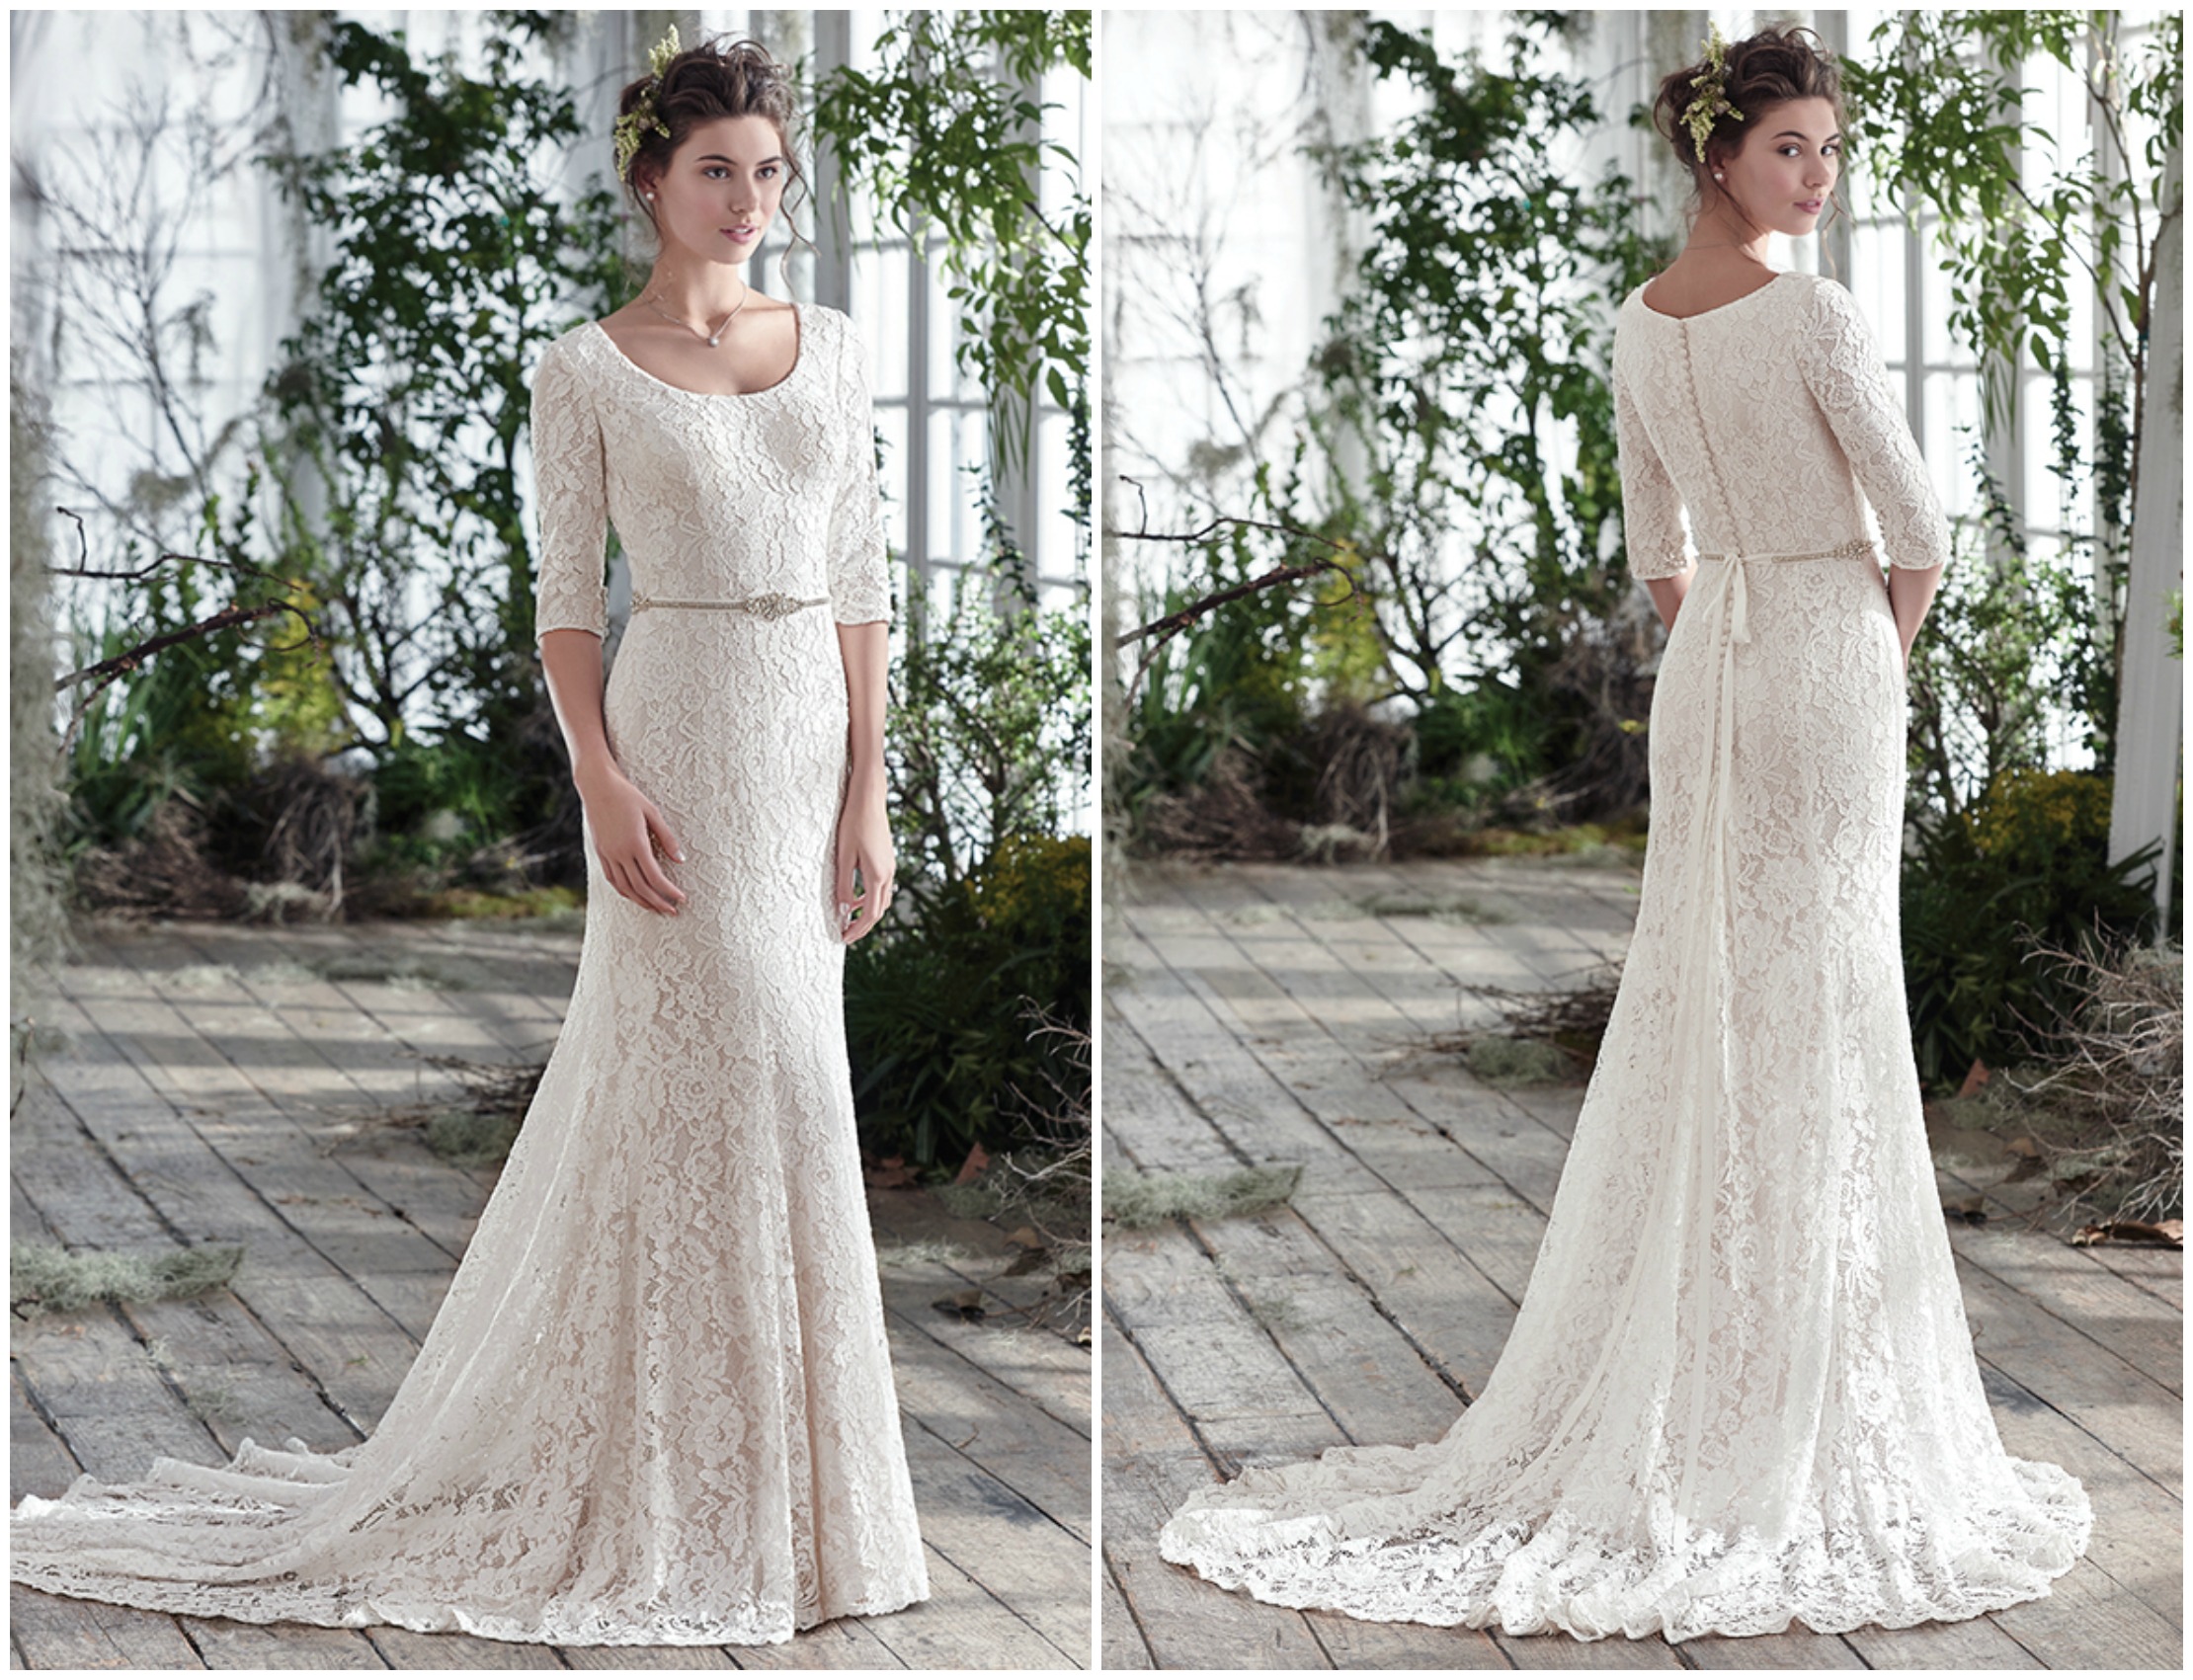 Feminine yet simply elegant, this unembellished lace fit and flare wedding dress over Inessa jersey, with three-quarter sleeves and scoop neckline, puts emphasis on refined lightness. Finished with covered buttons over zipper closure. Detachable beaded belt sold separately. 

<a href="https://www.maggiesottero.com/maggie-sottero/fairchild/9774" target="_blank">Maggie Sottero</a>